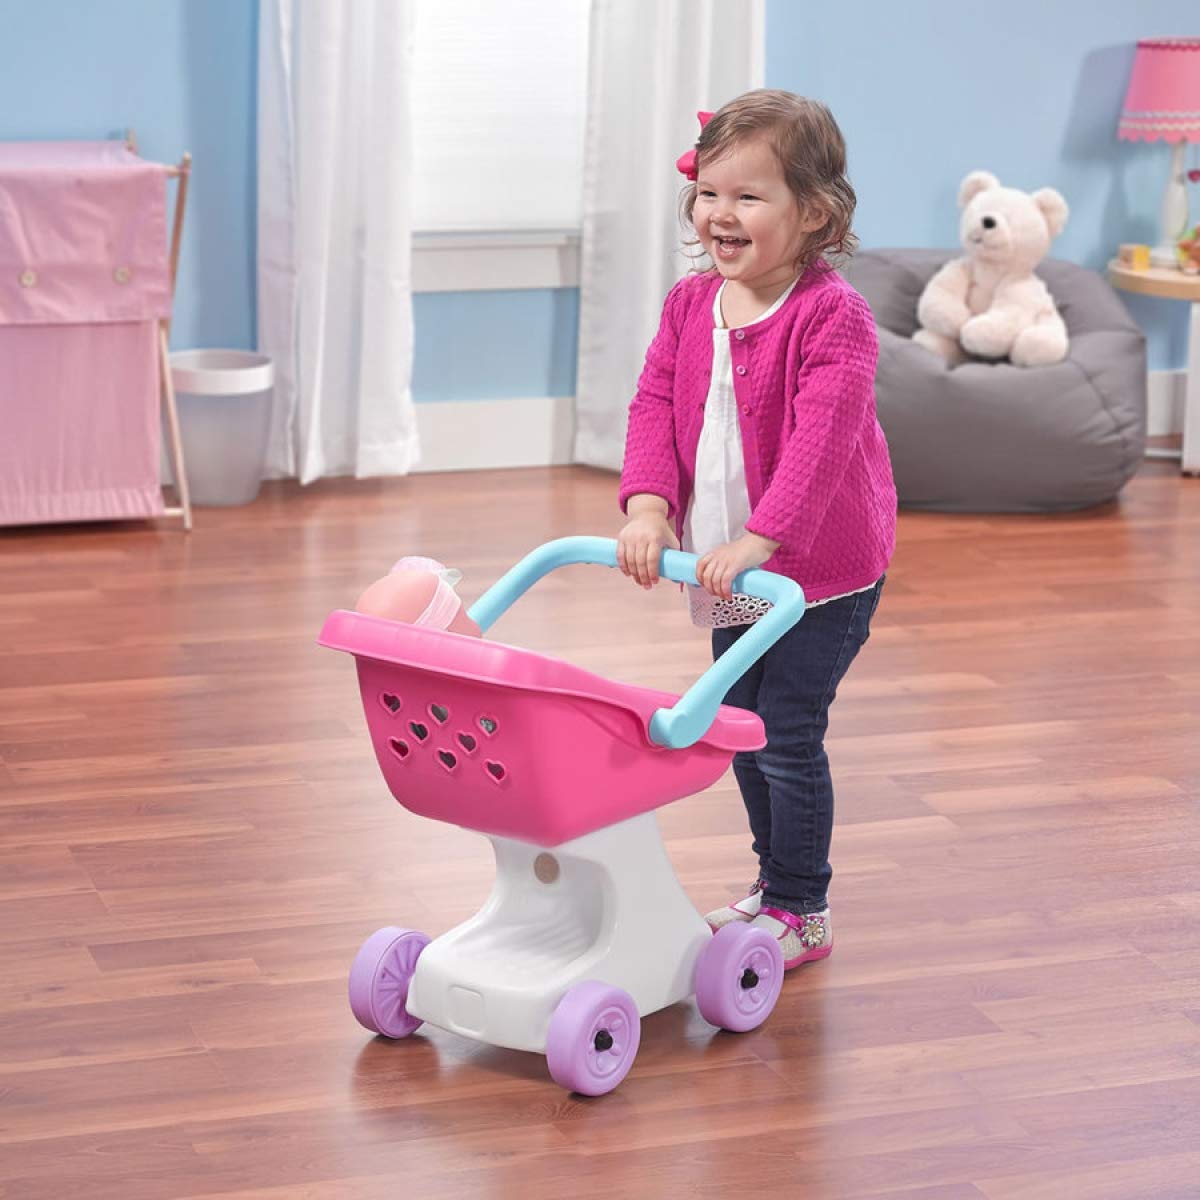 Love and Care Doll Stroller | Step2